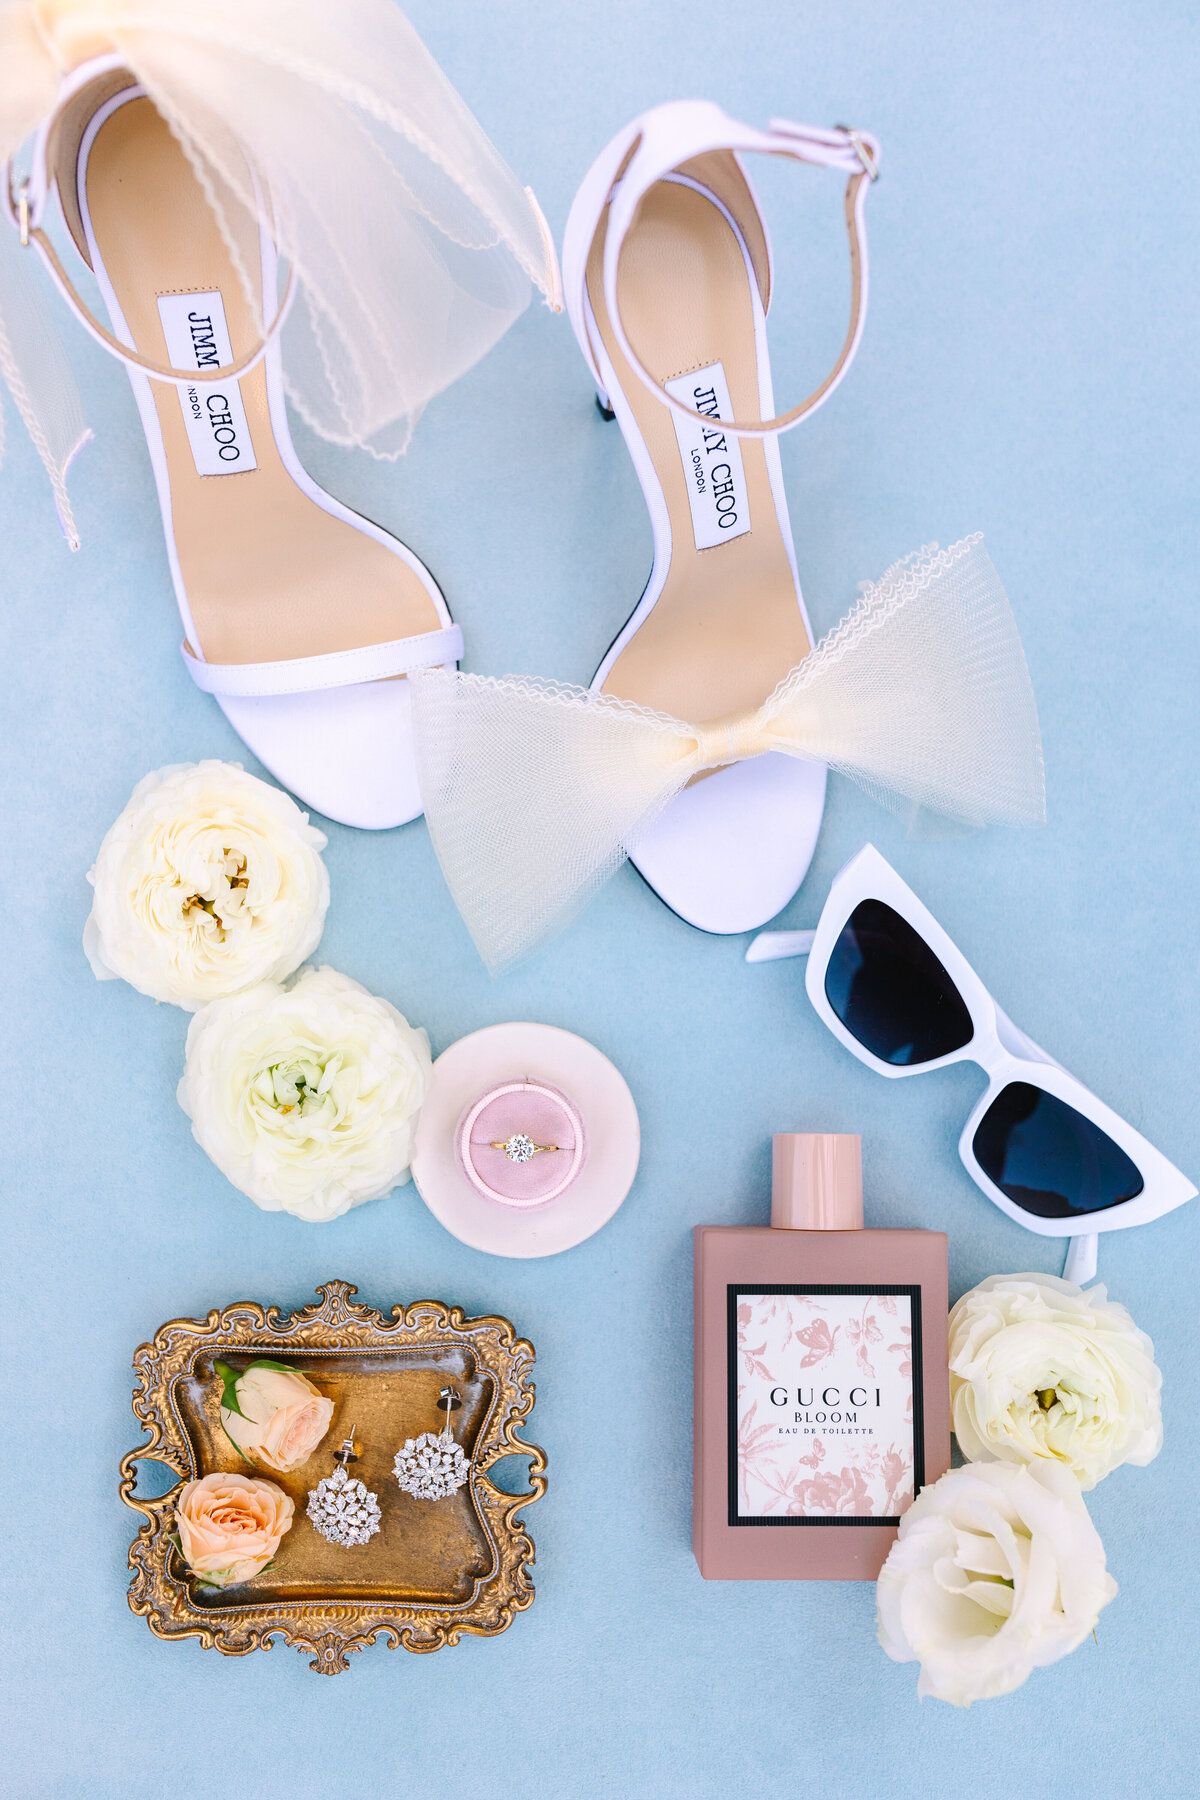 flat lay image of bride's shoes, sunglasses, perfume, jewelry, and flowers on blue background.